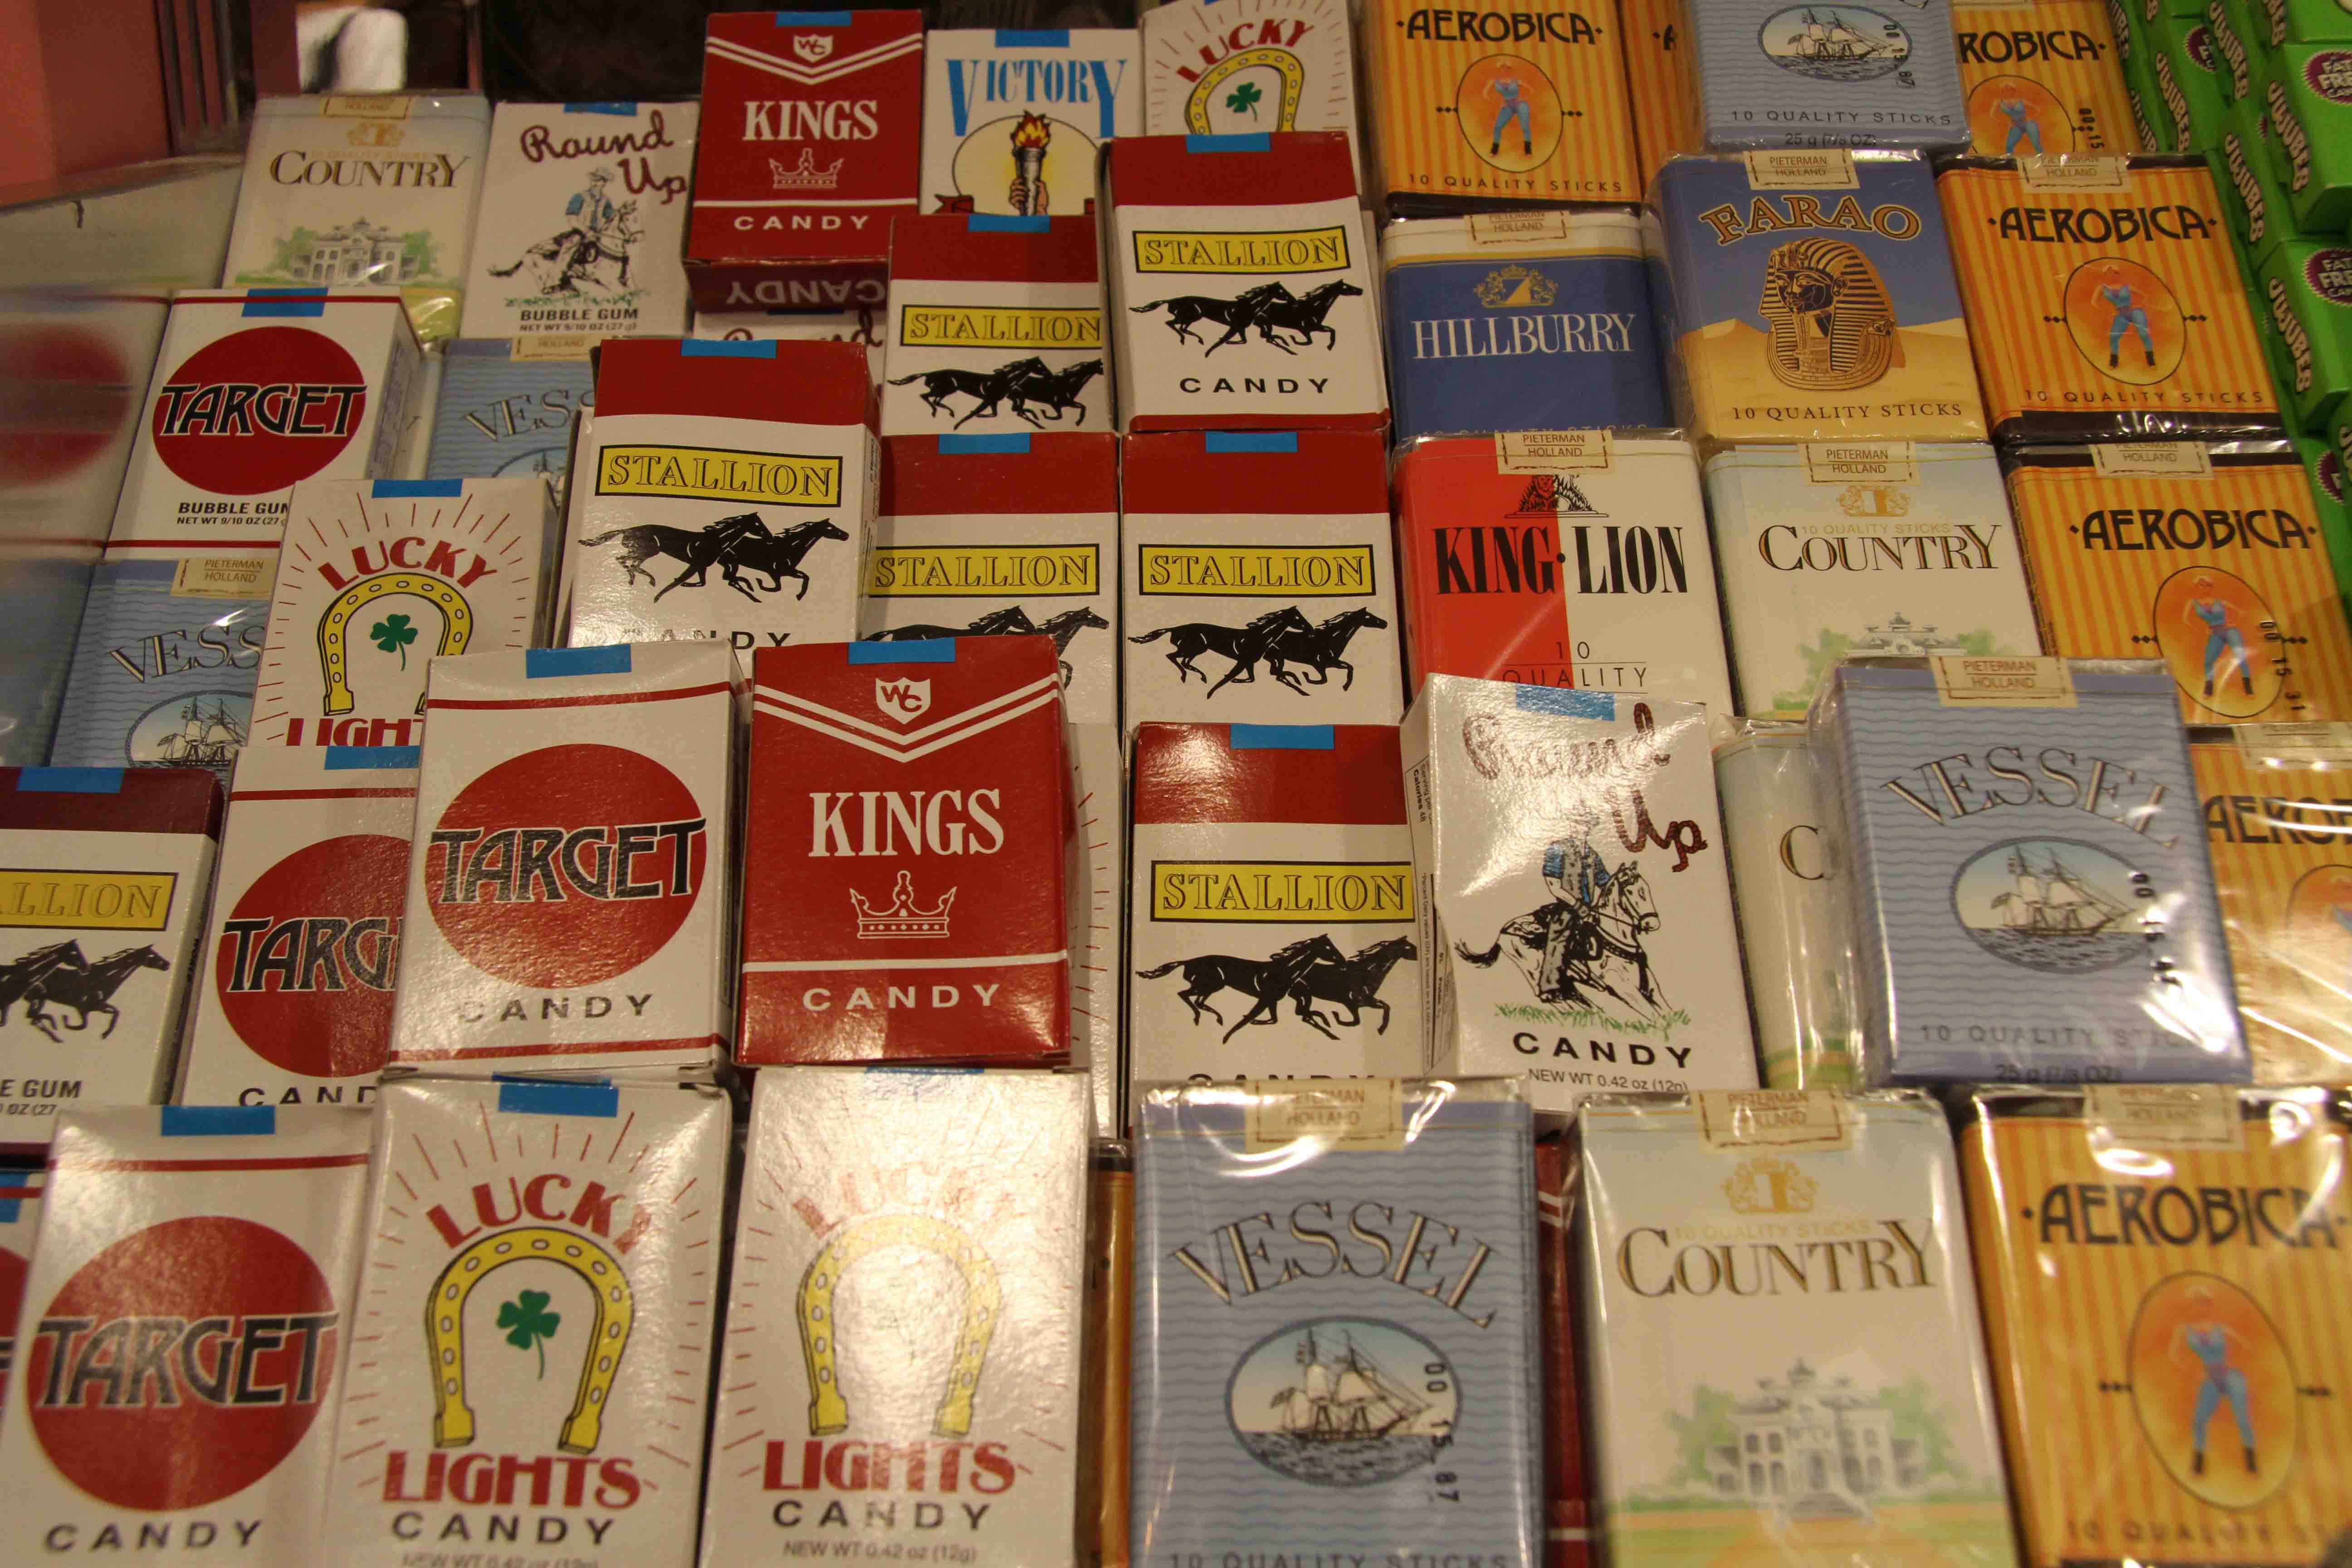 CIGARETTES CANDY